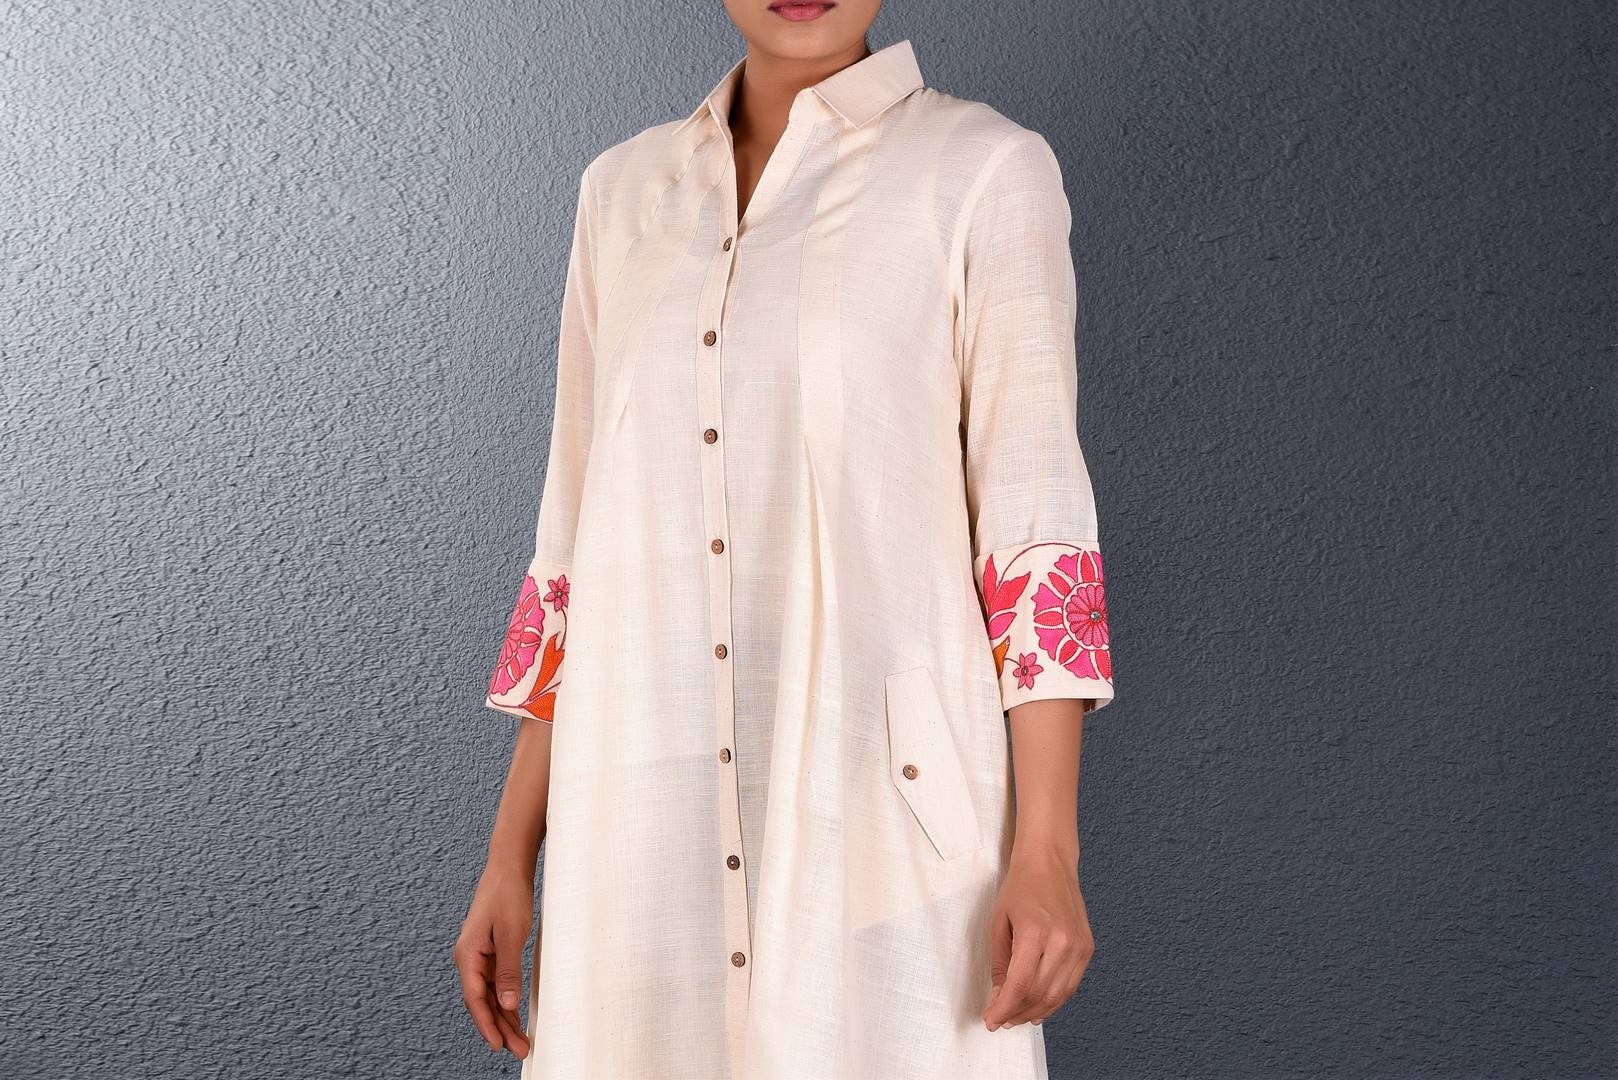 Buy off-white embroidered asymmetric shirt dress online in USA. Pick your favorite Indian dresses from Pure Elegance clothing store in USA. Step up your style with a range of Indian designer dresses, suits, designer lehengas also available on our online store. -top